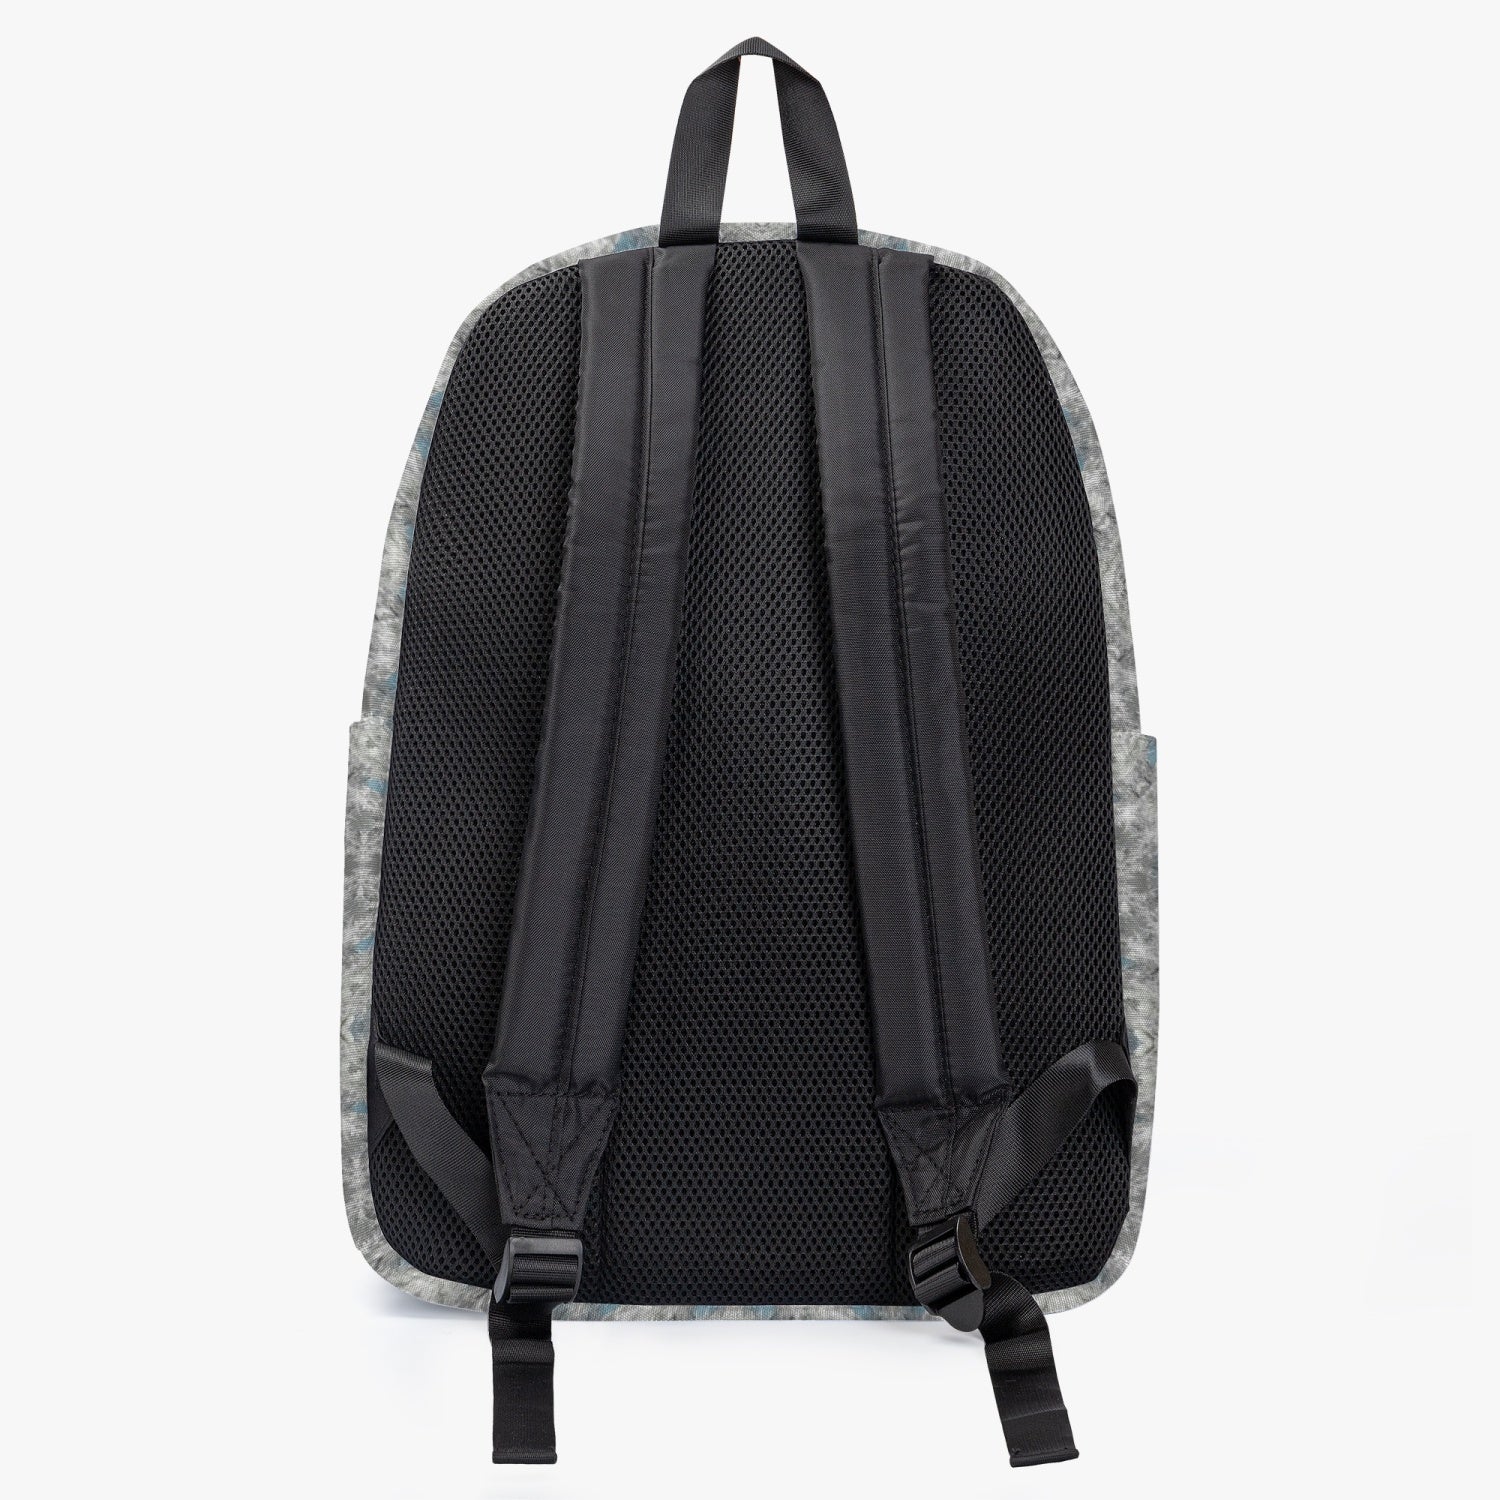 Snow Cristal Geomatric patterned Canvas Backpack, by Sensus Studio Design